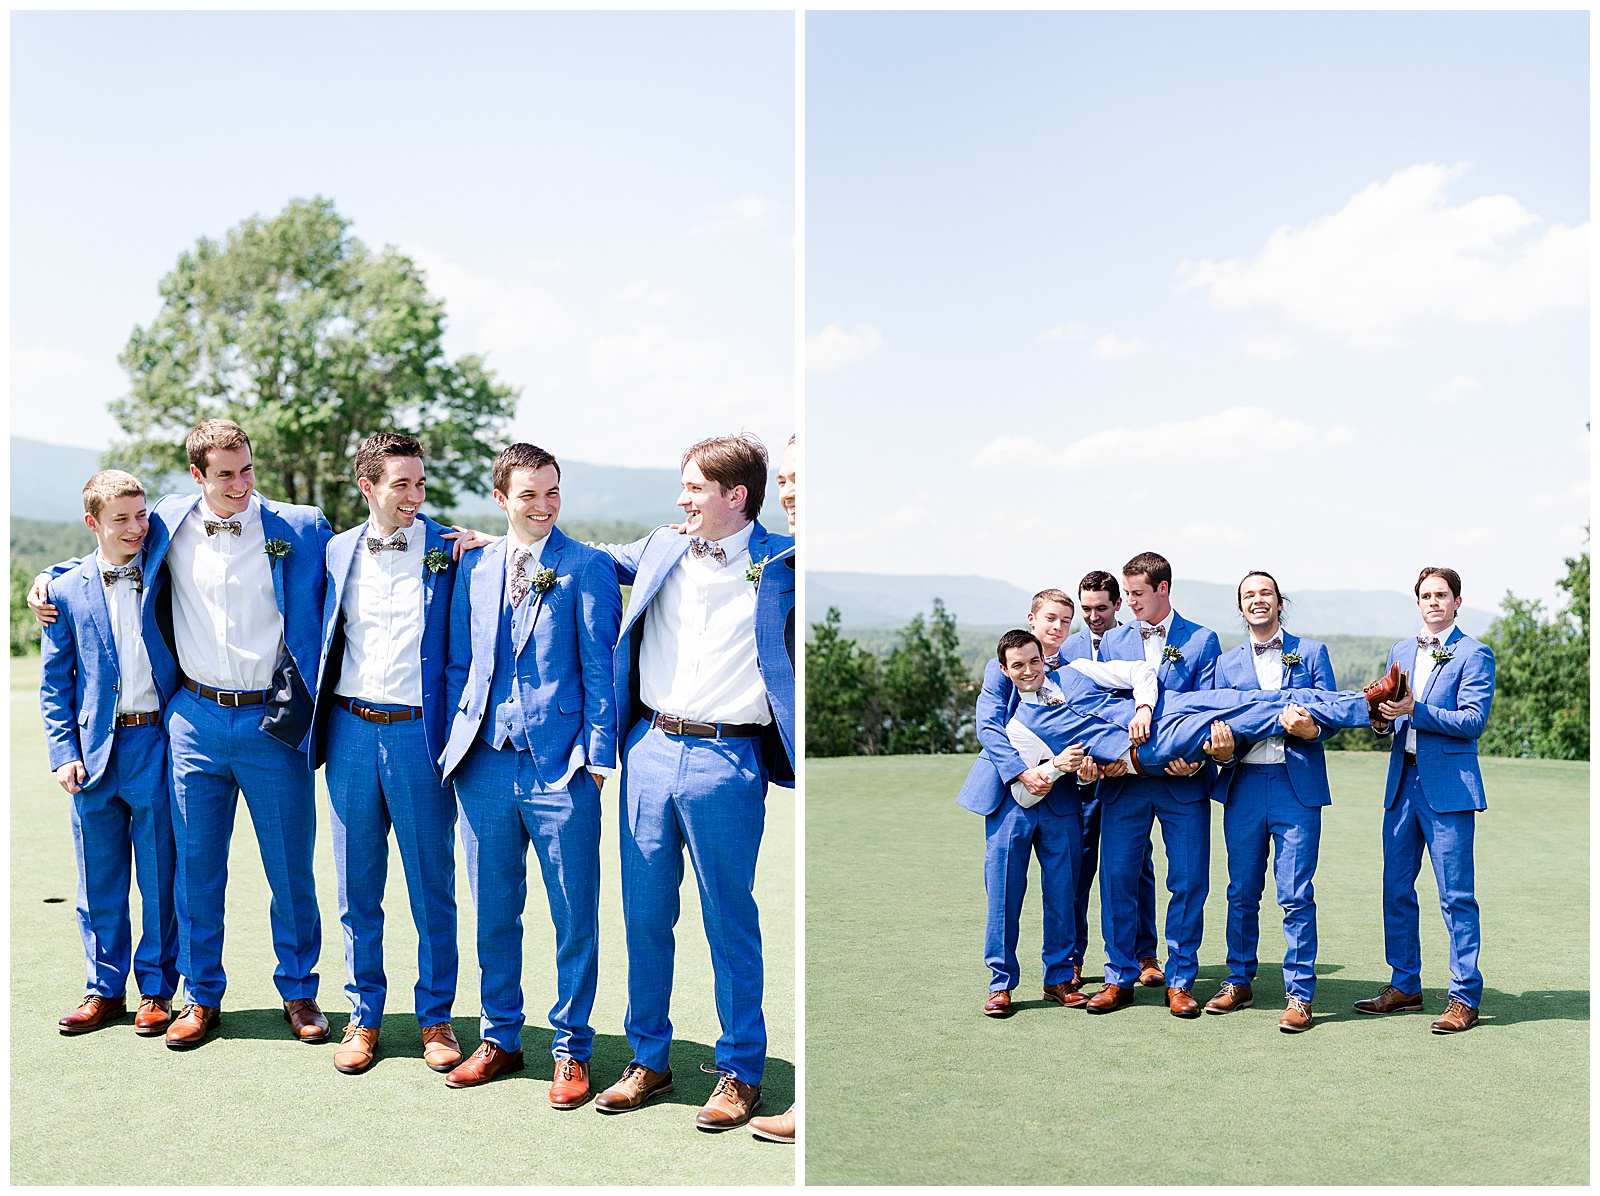 Blue Themed Suit Groomsmen Group Photos at Outdoorsy Summer Wedding at North Carolina Lakehouse in the Mountains | check out the full wedding at KevynDixonPhoto.com